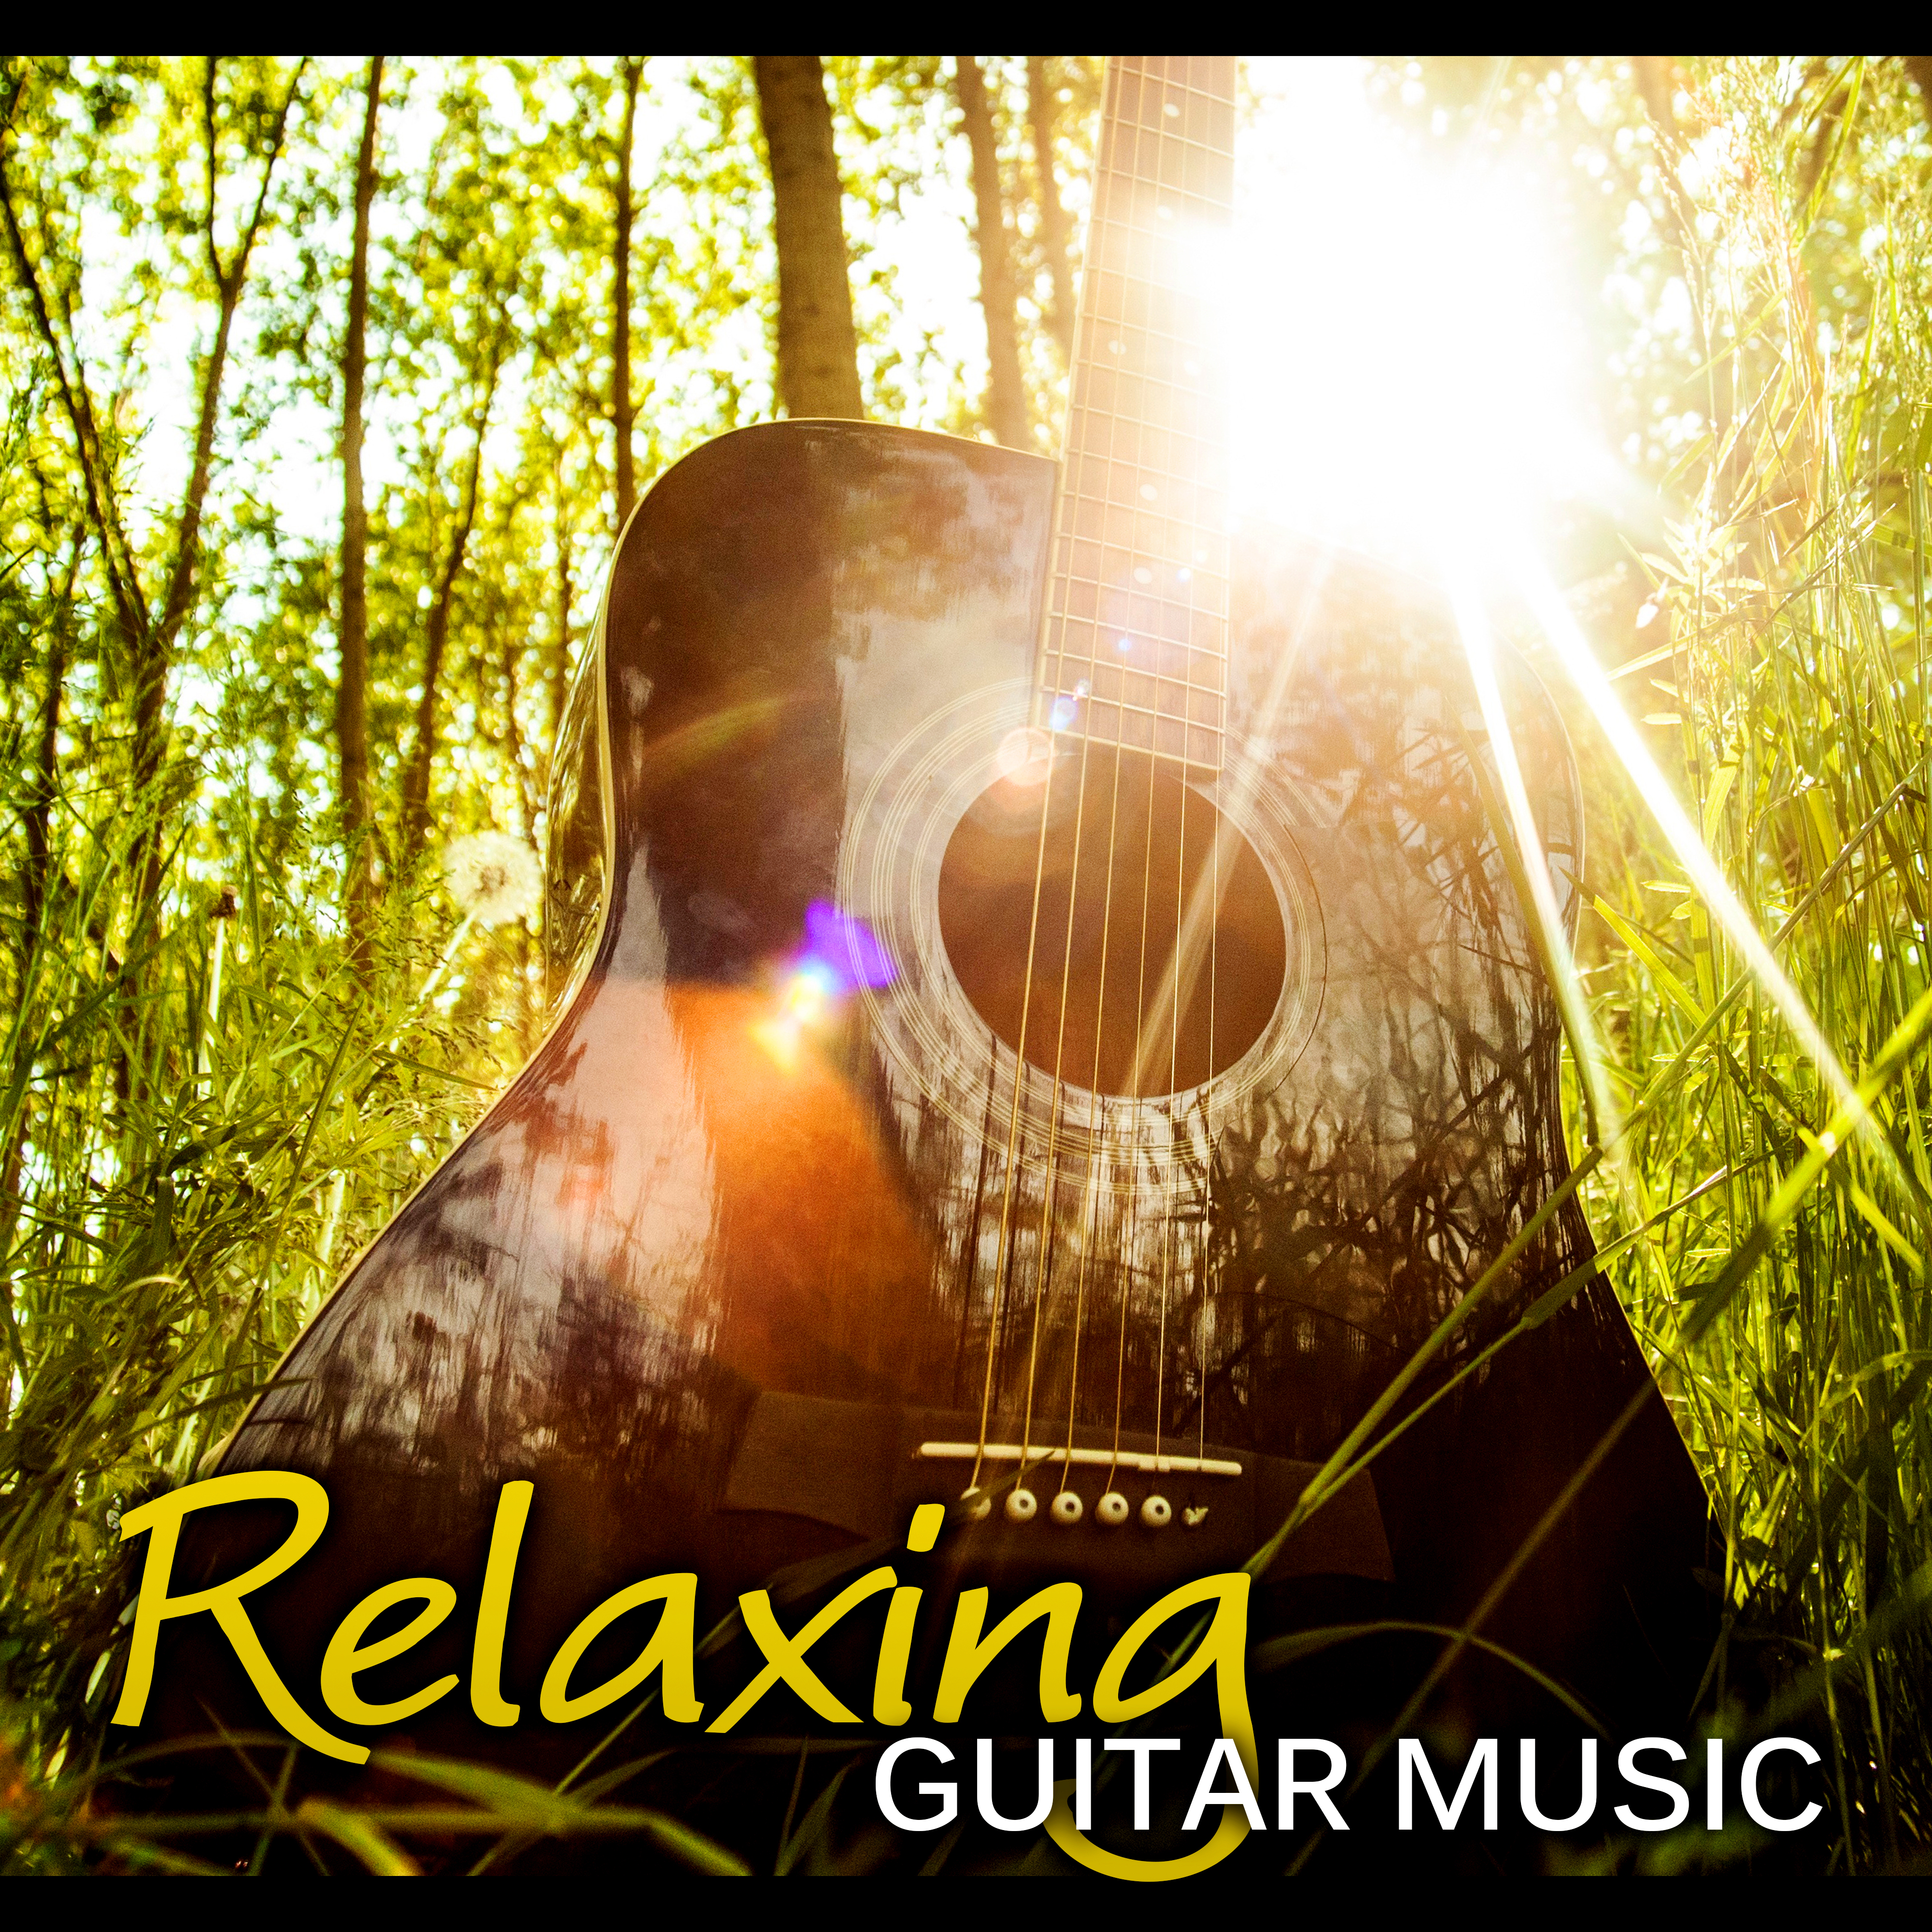 The Best Relaxing Guitar Music in the World